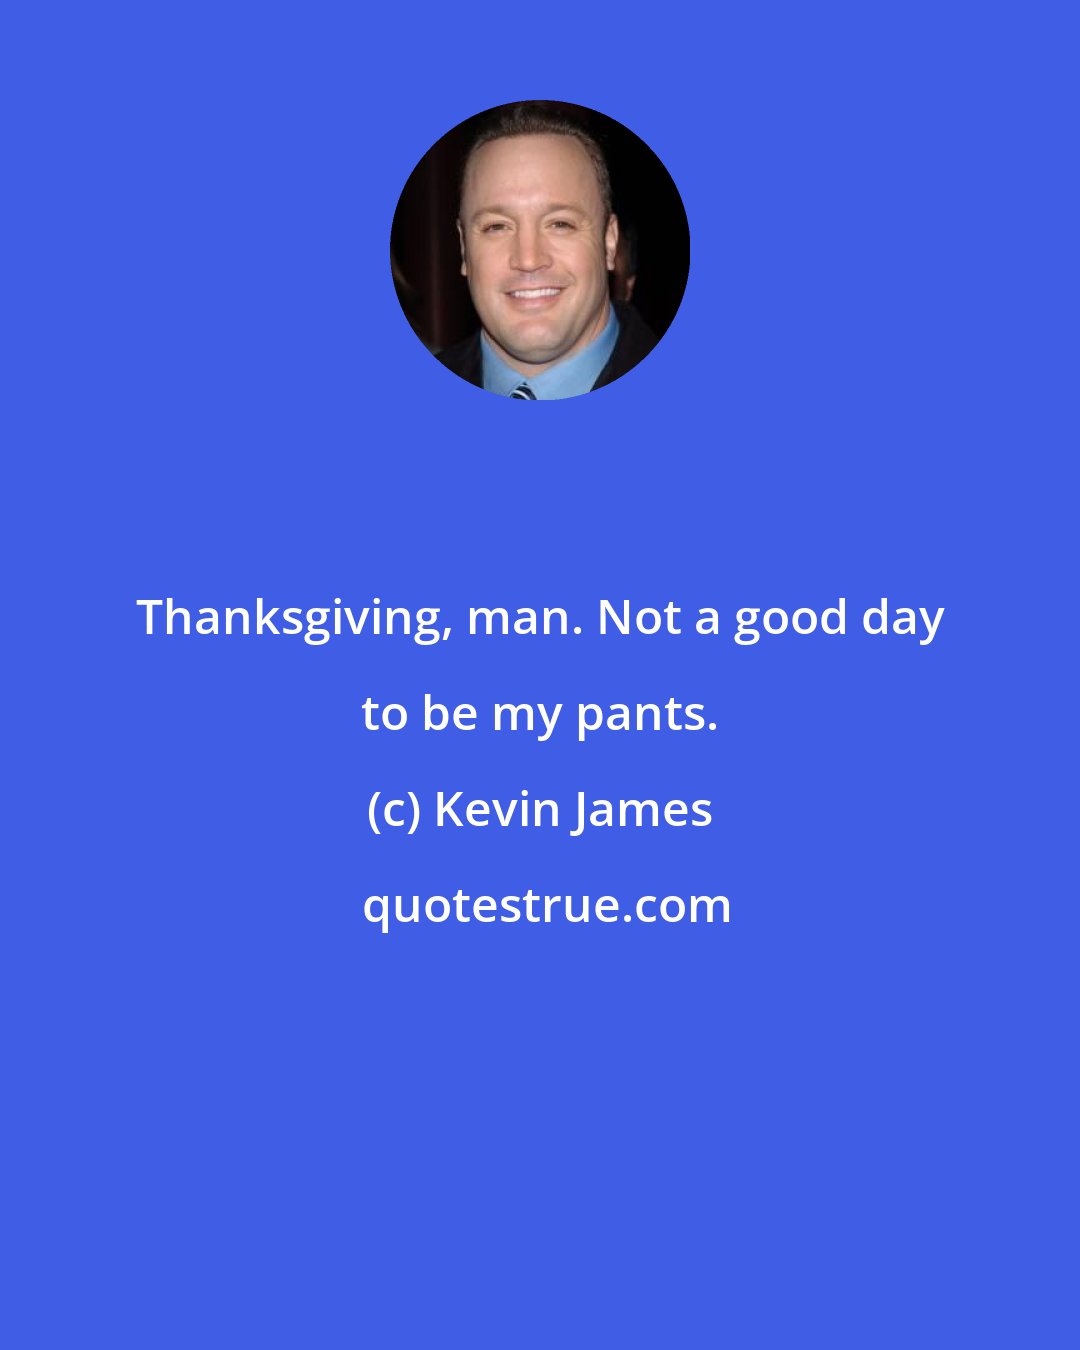 Kevin James: Thanksgiving, man. Not a good day to be my pants.